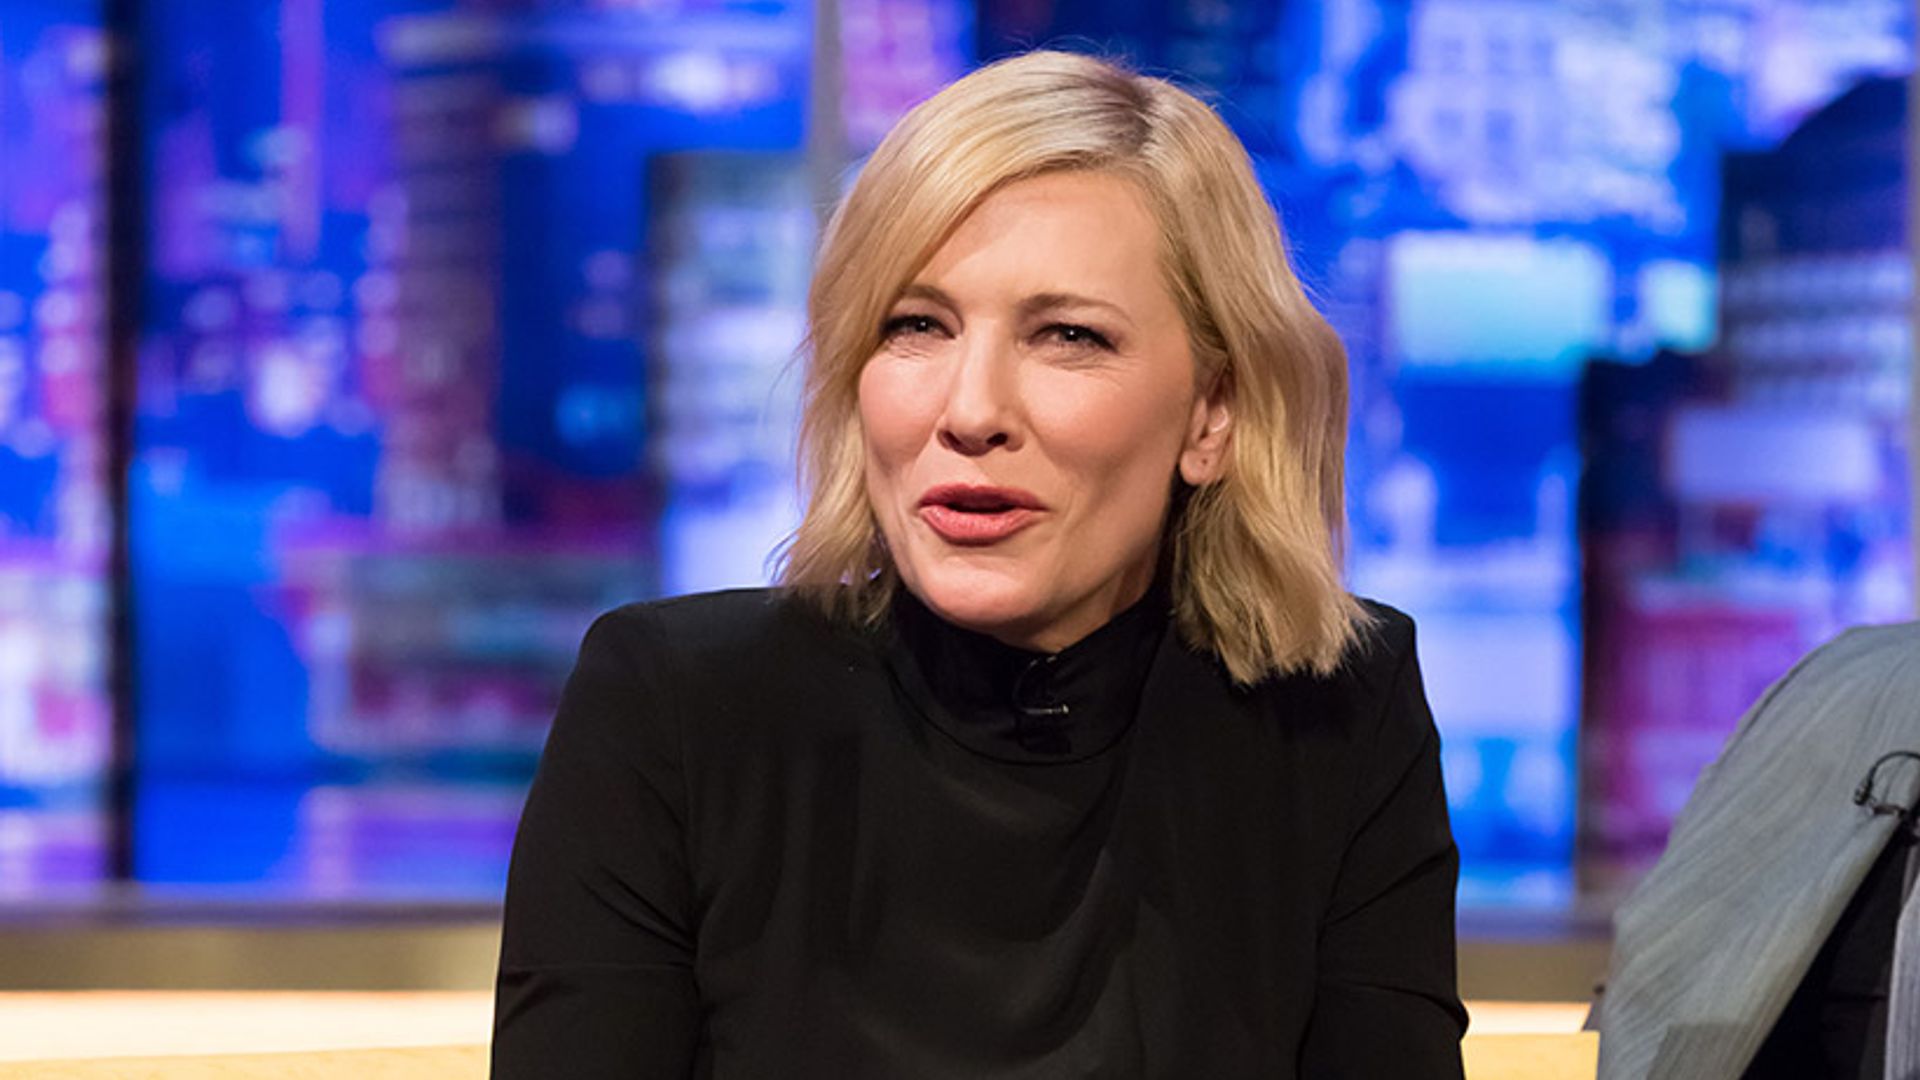 Cate Blanchett opens up about intimate dinner with Prince Philip